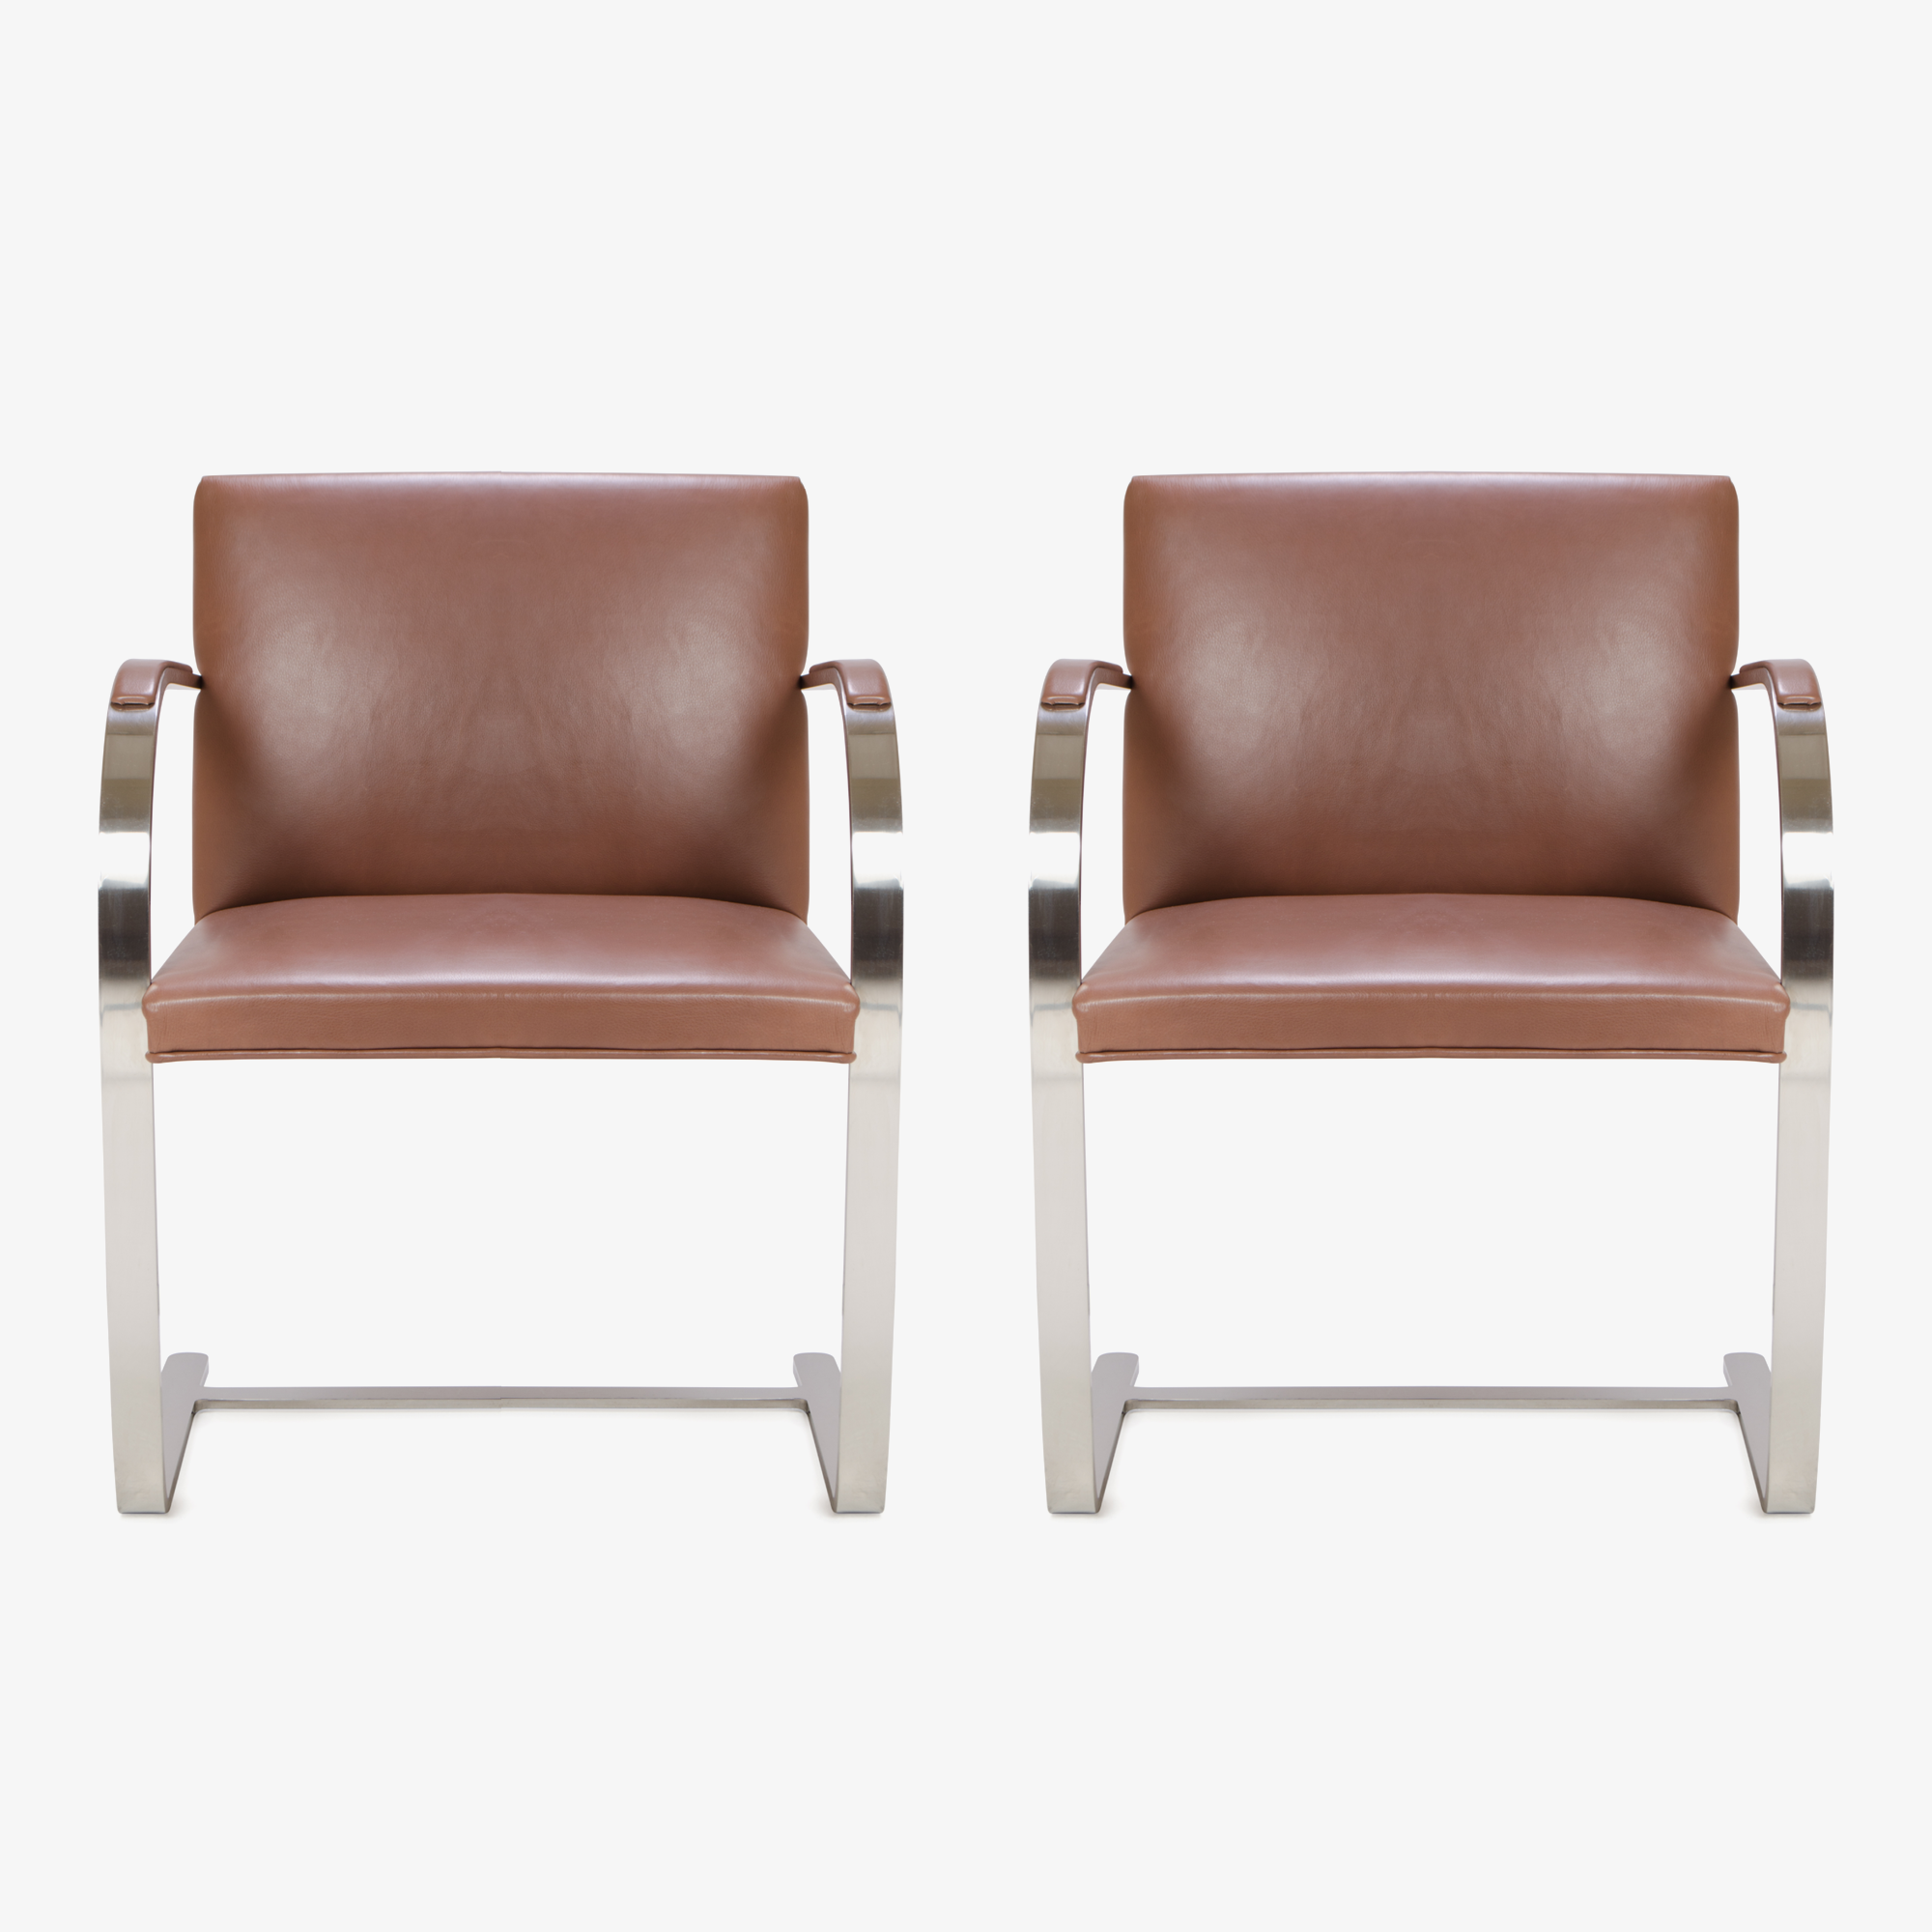 Knoll Brno Flat-Bar Chairs in Leather